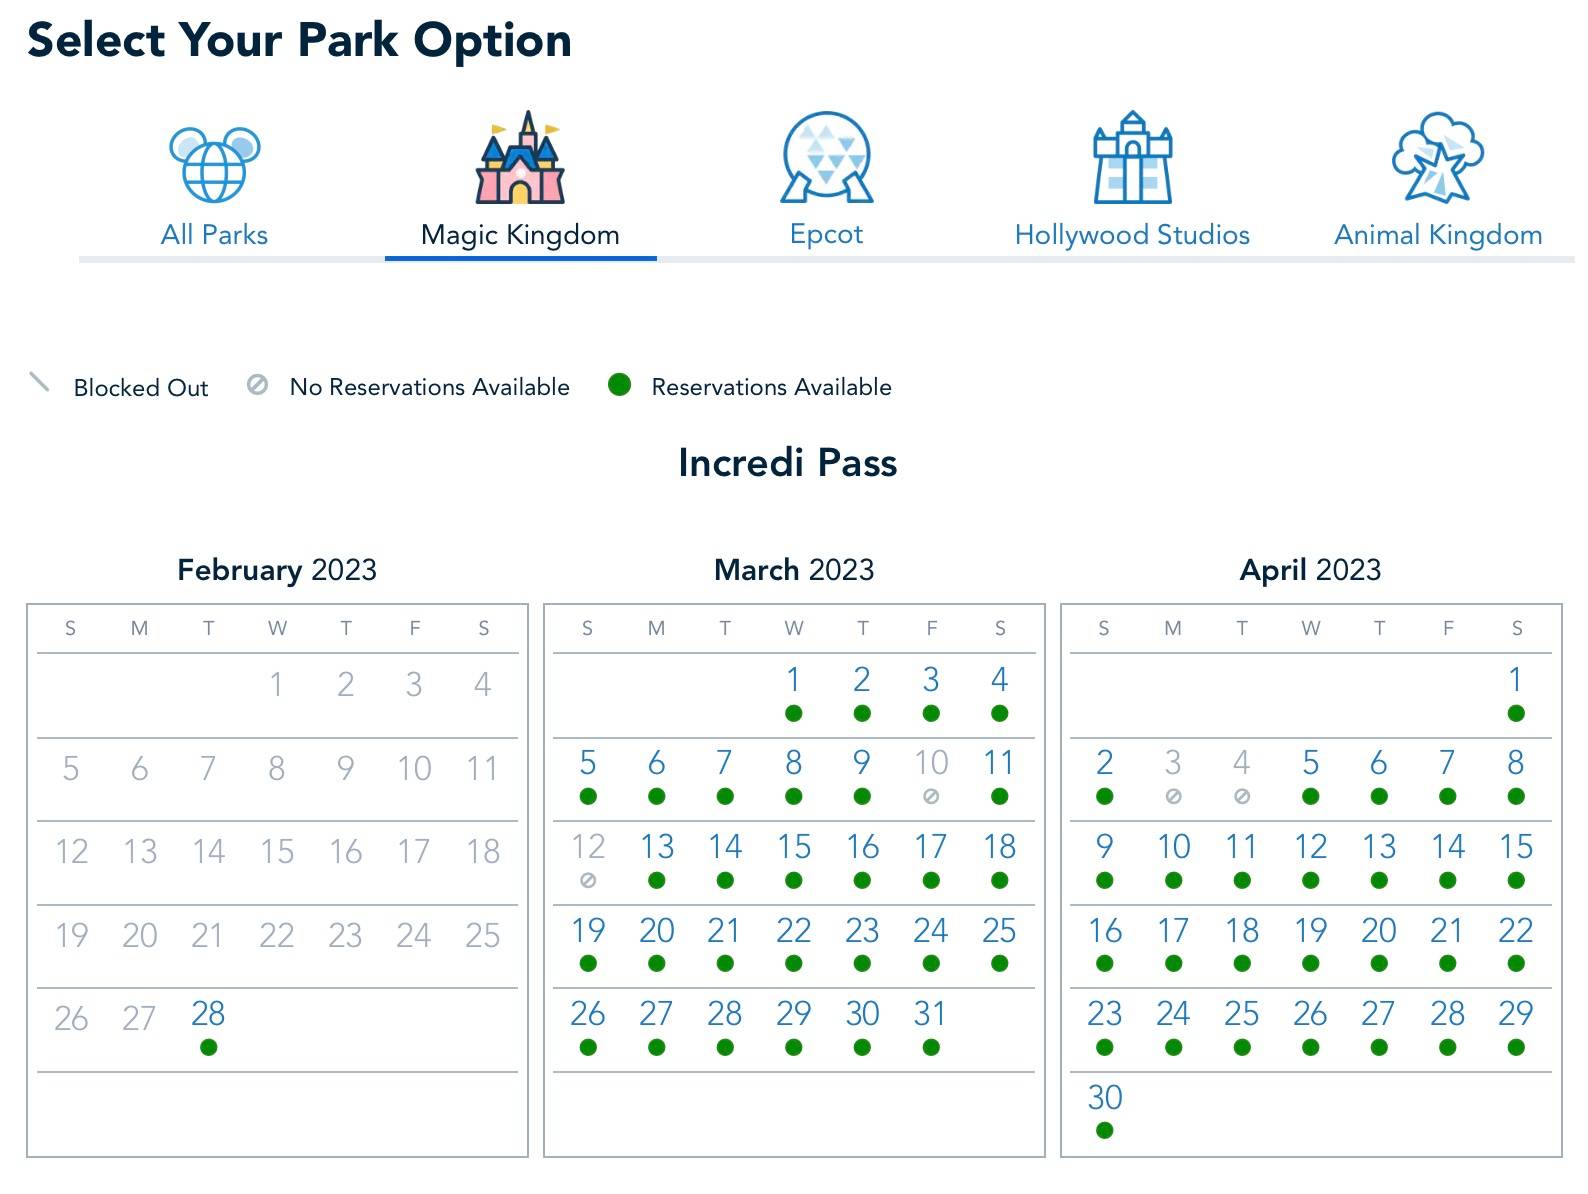 Disney Park Pass availability for Passholders in March 2023